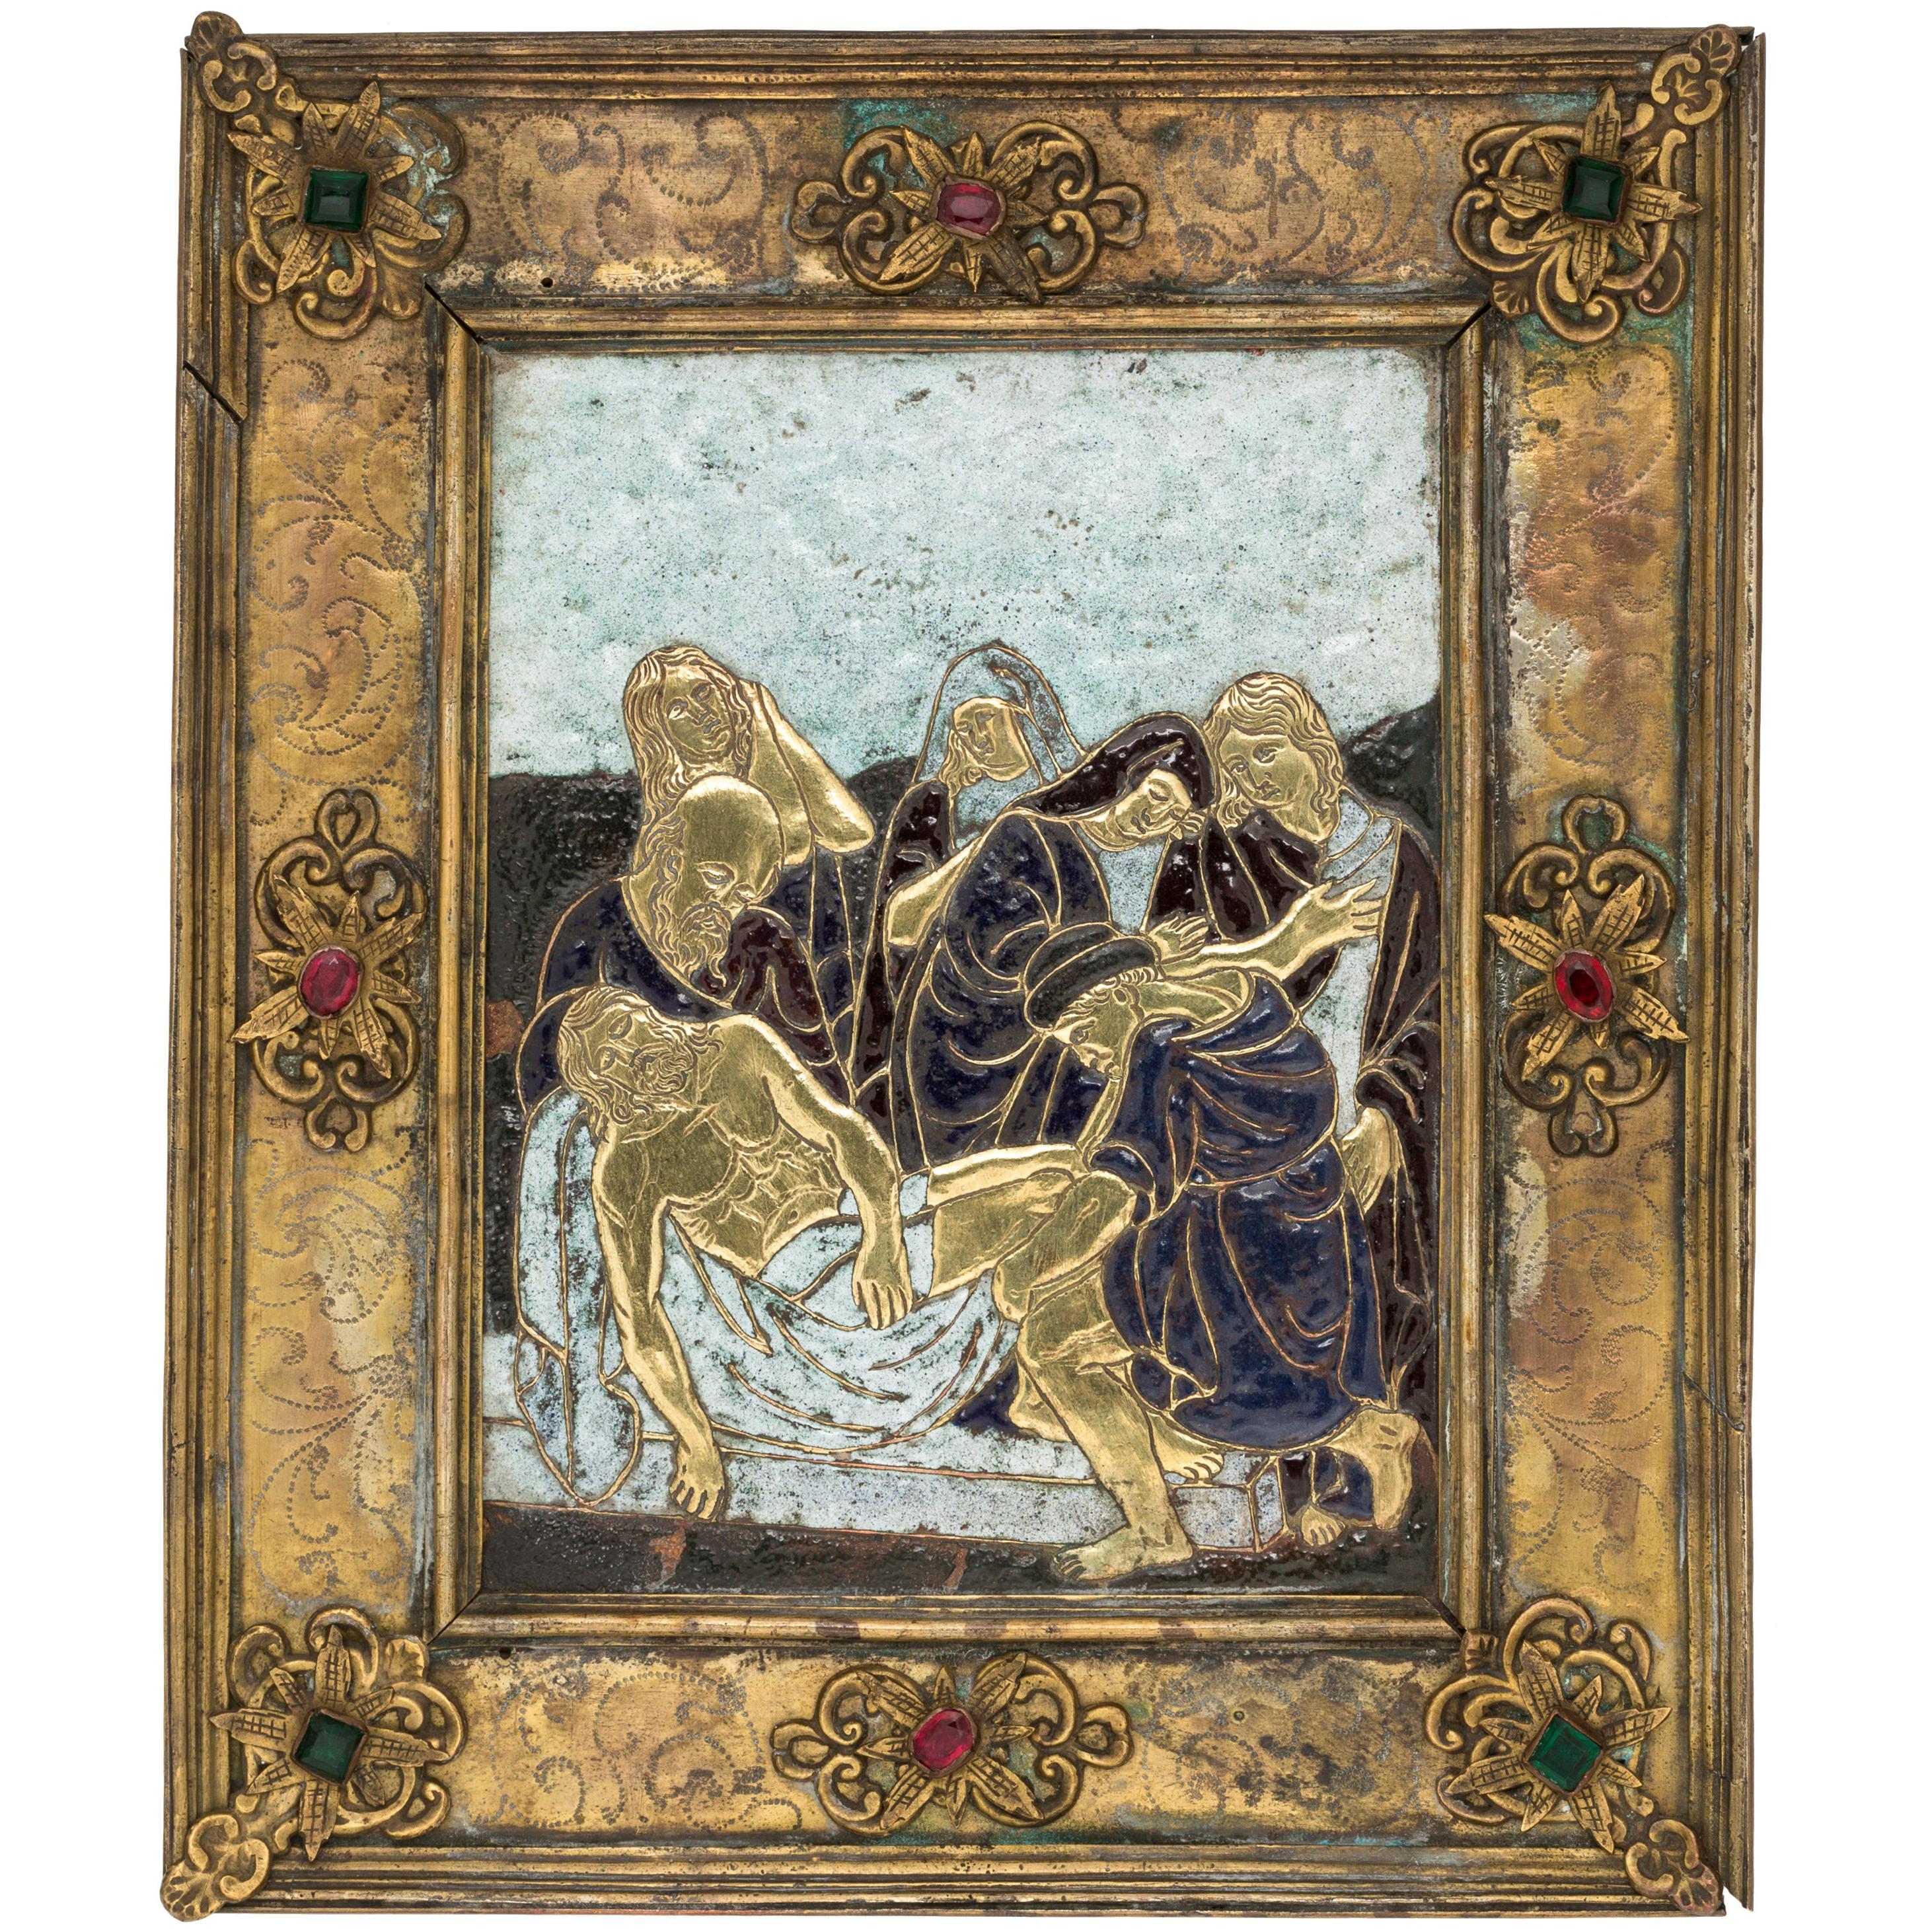 19th Century Brass Enamel Limoges Religious Plaque of the Lamentation of Christ